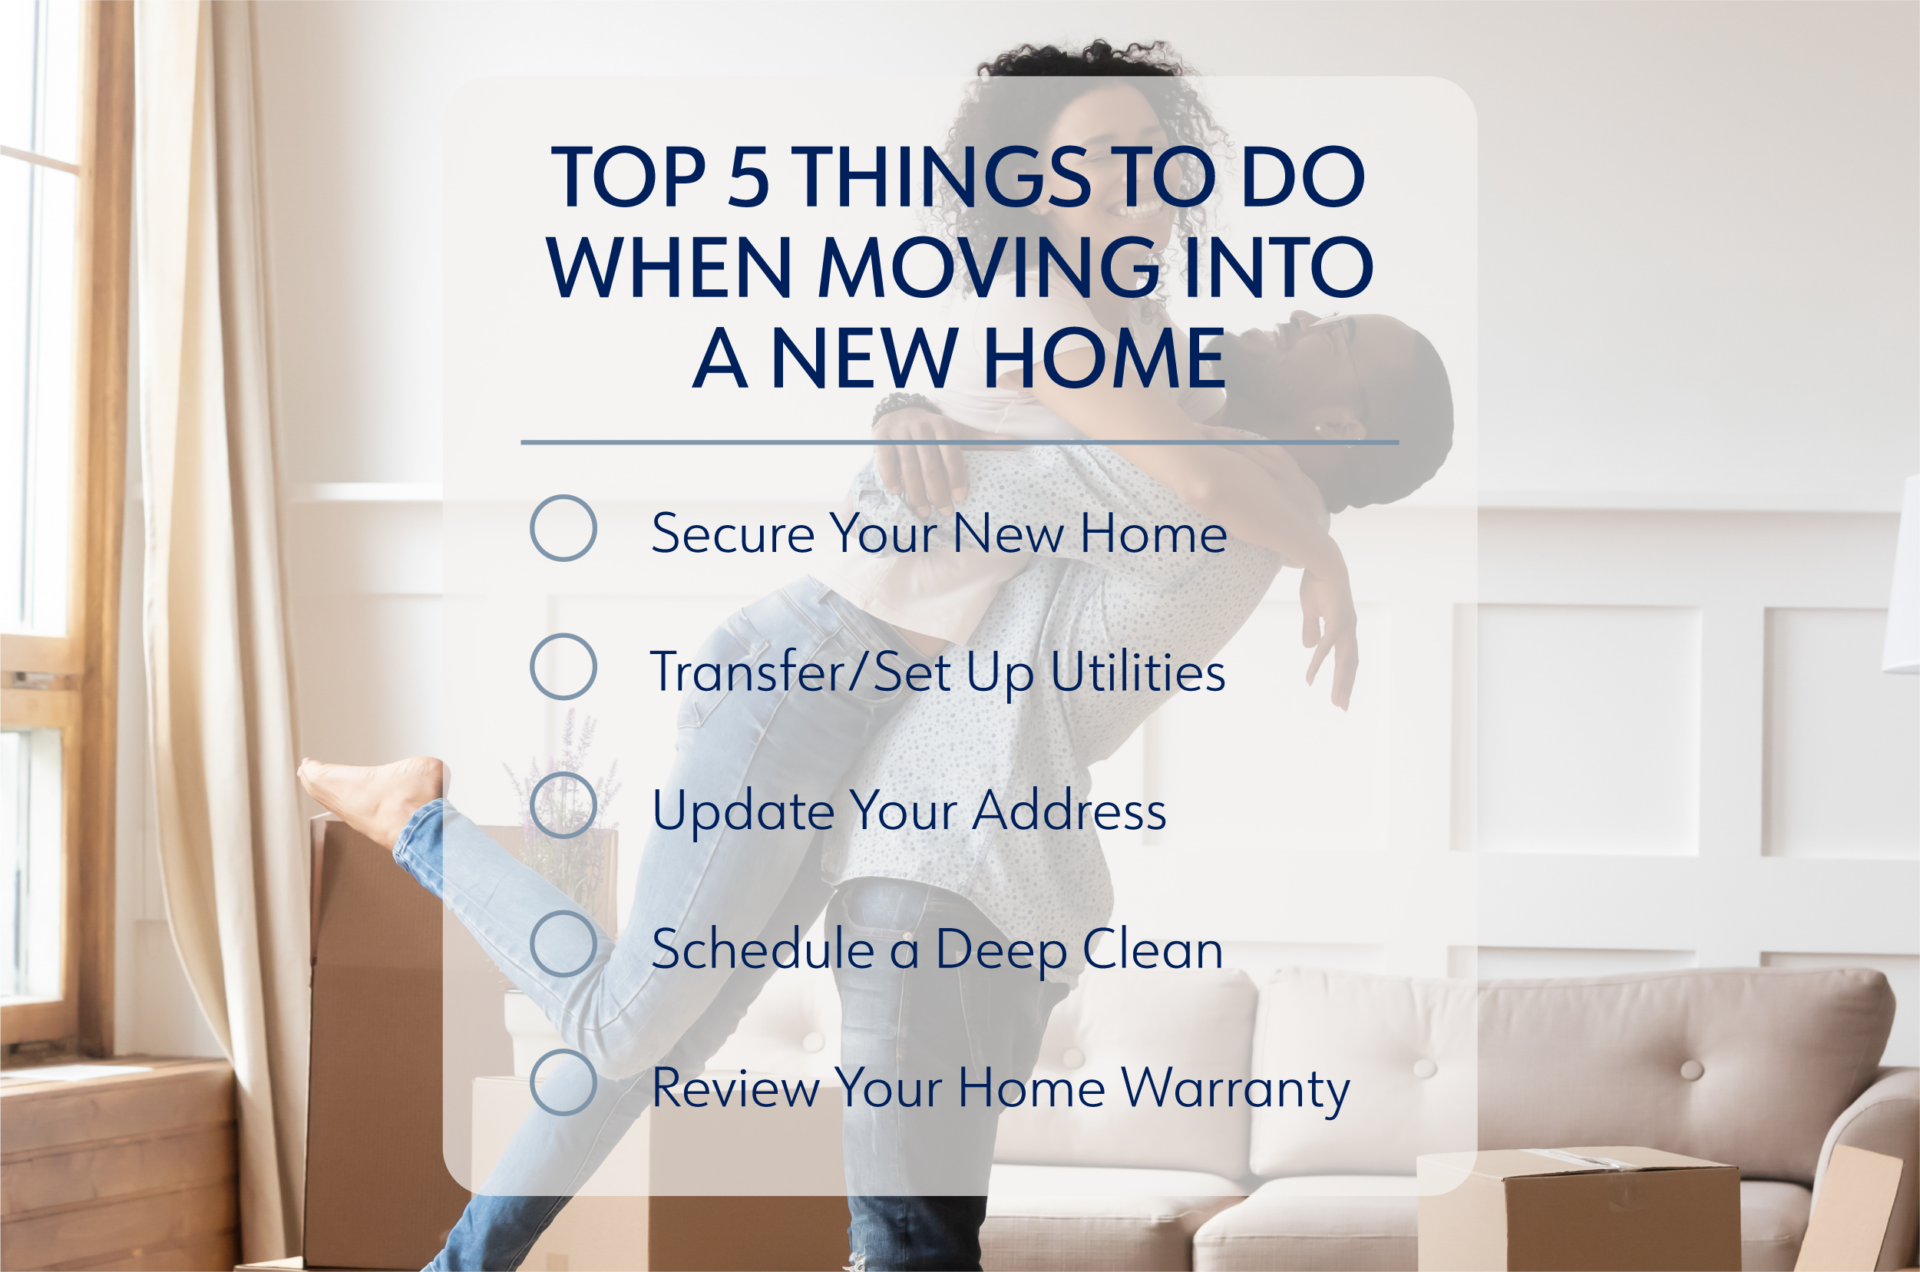 New Home Checklist: What Should You Buy When Moving Into A New